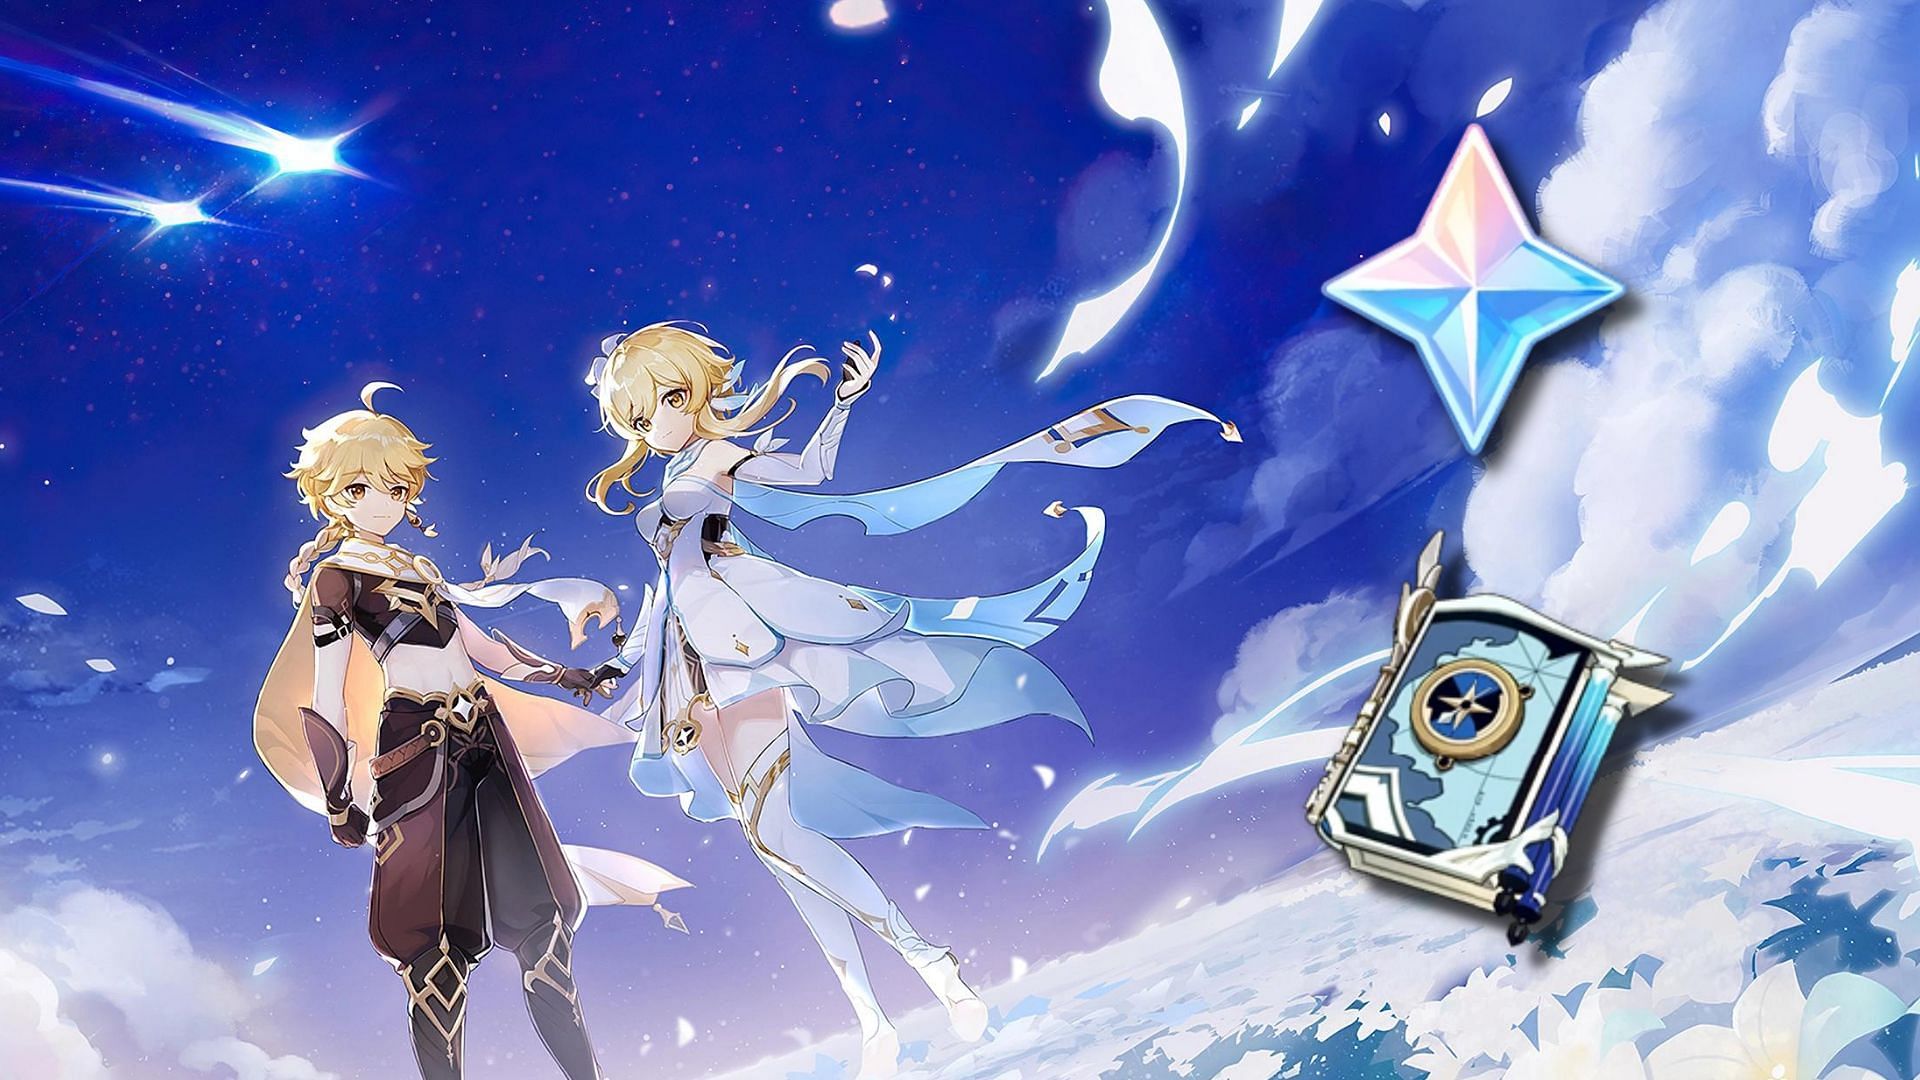 Stellar Reunion event helps returning players with primogems and resources (Image via Genshin Impact)